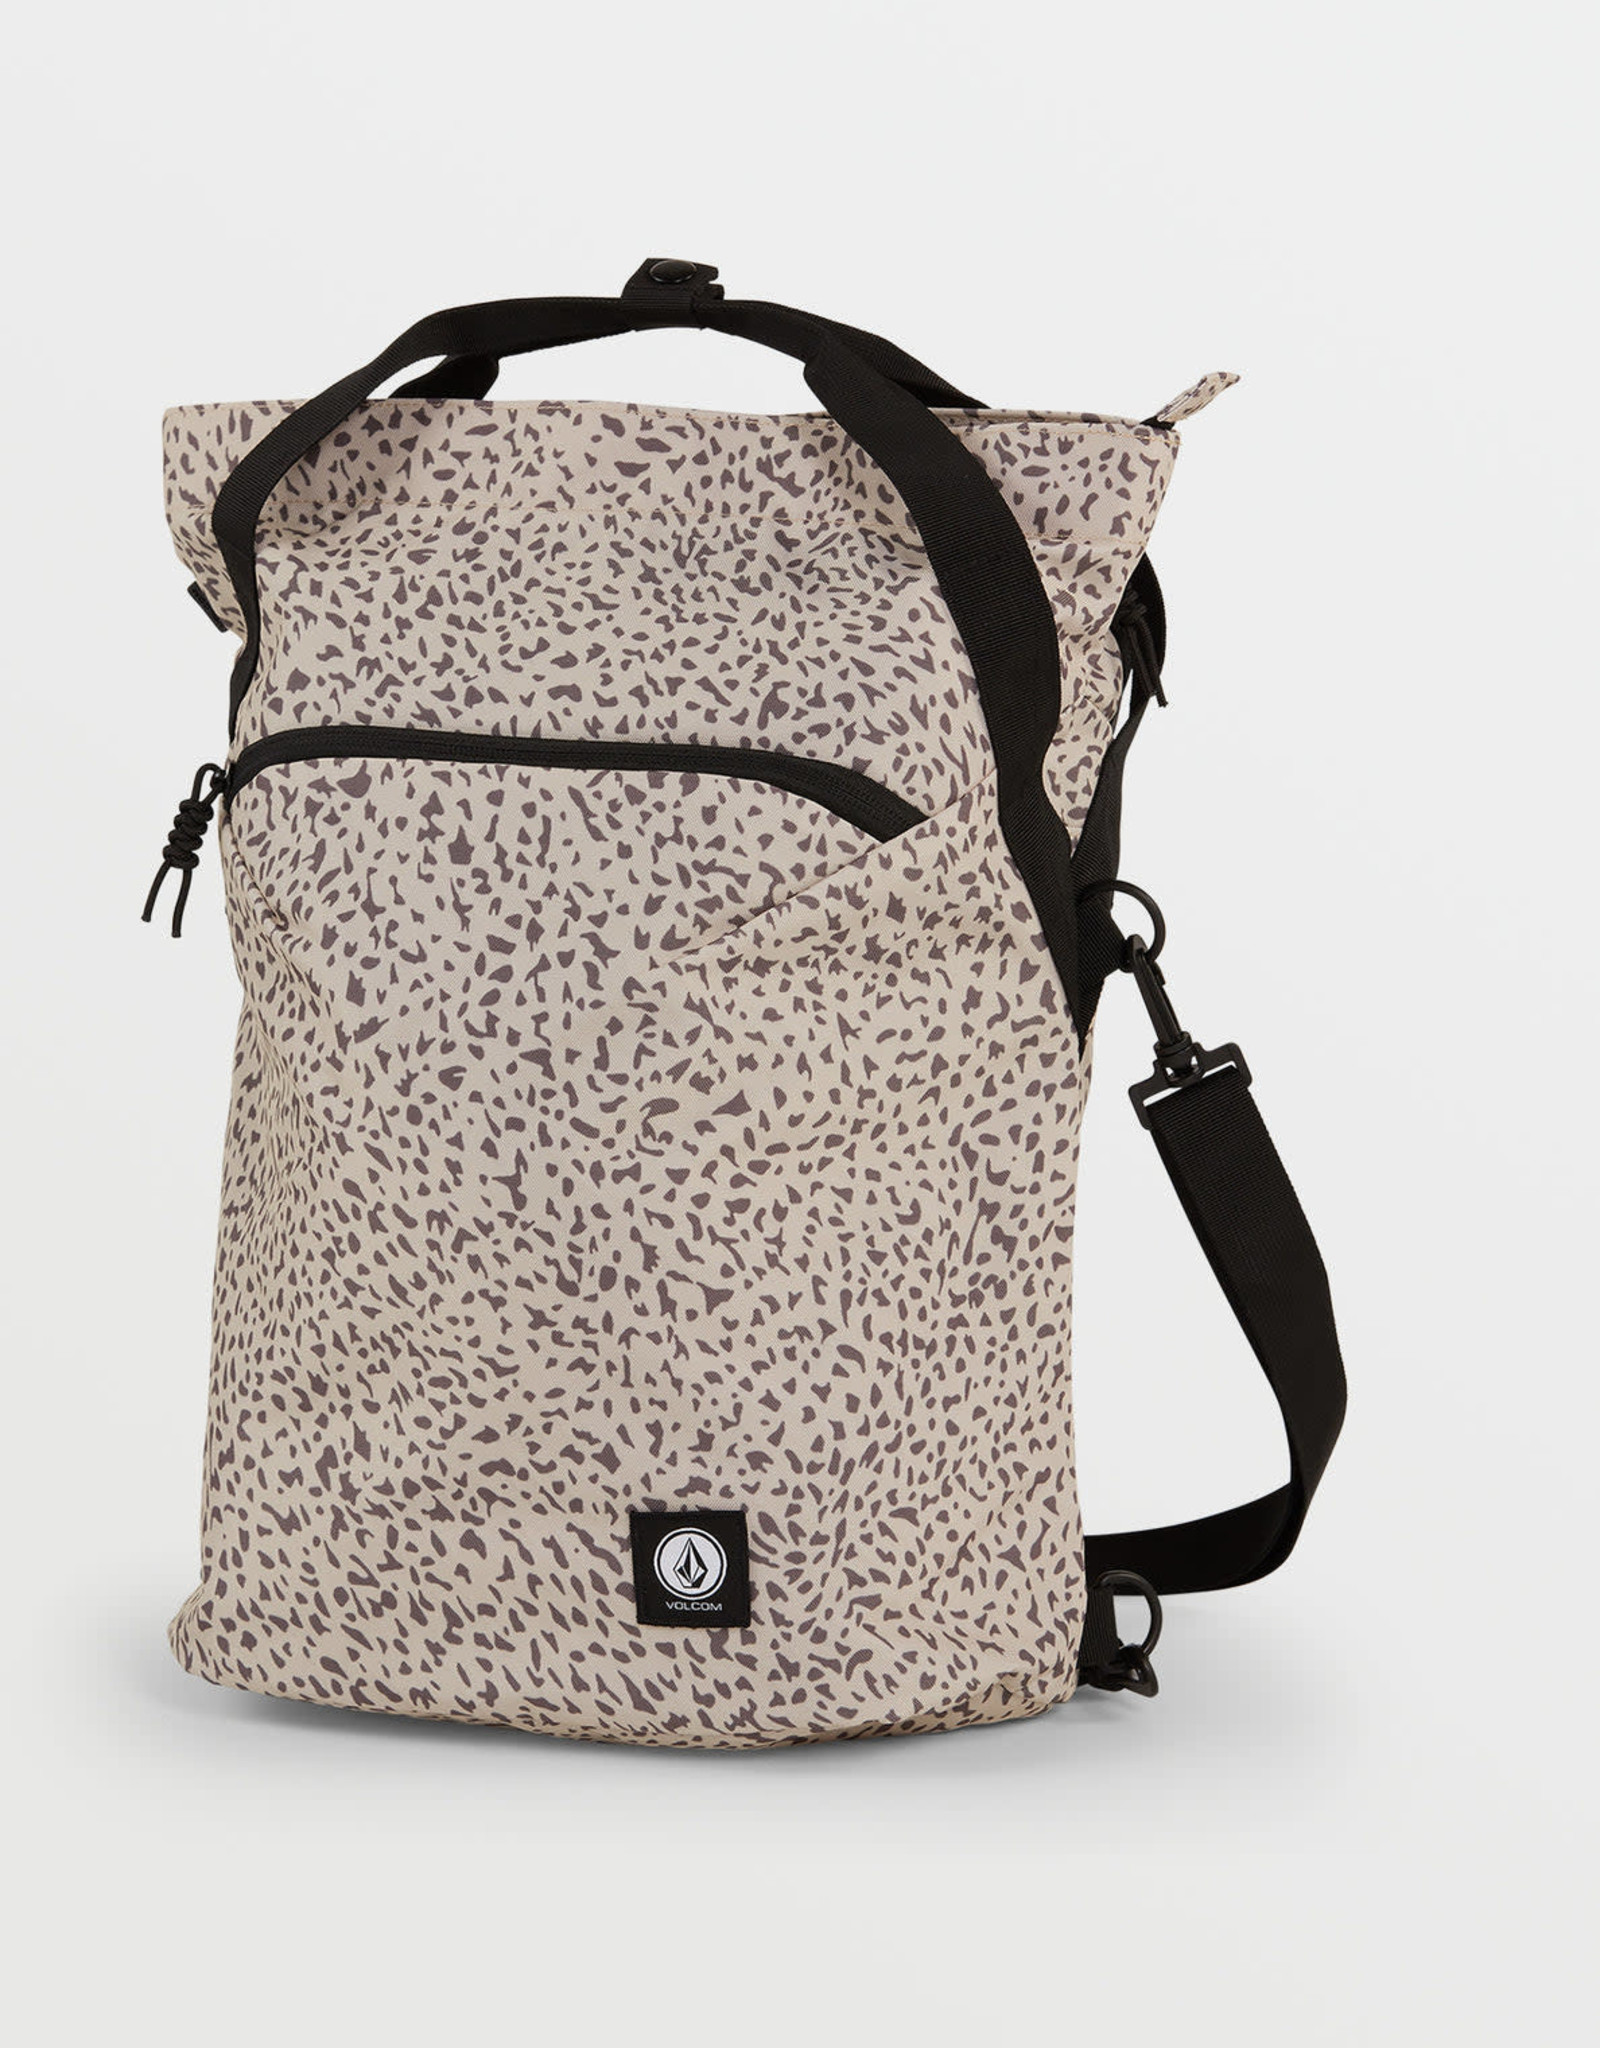 Volcom DAY TRIP POLY BACKPACK - ANIMAL TRIP